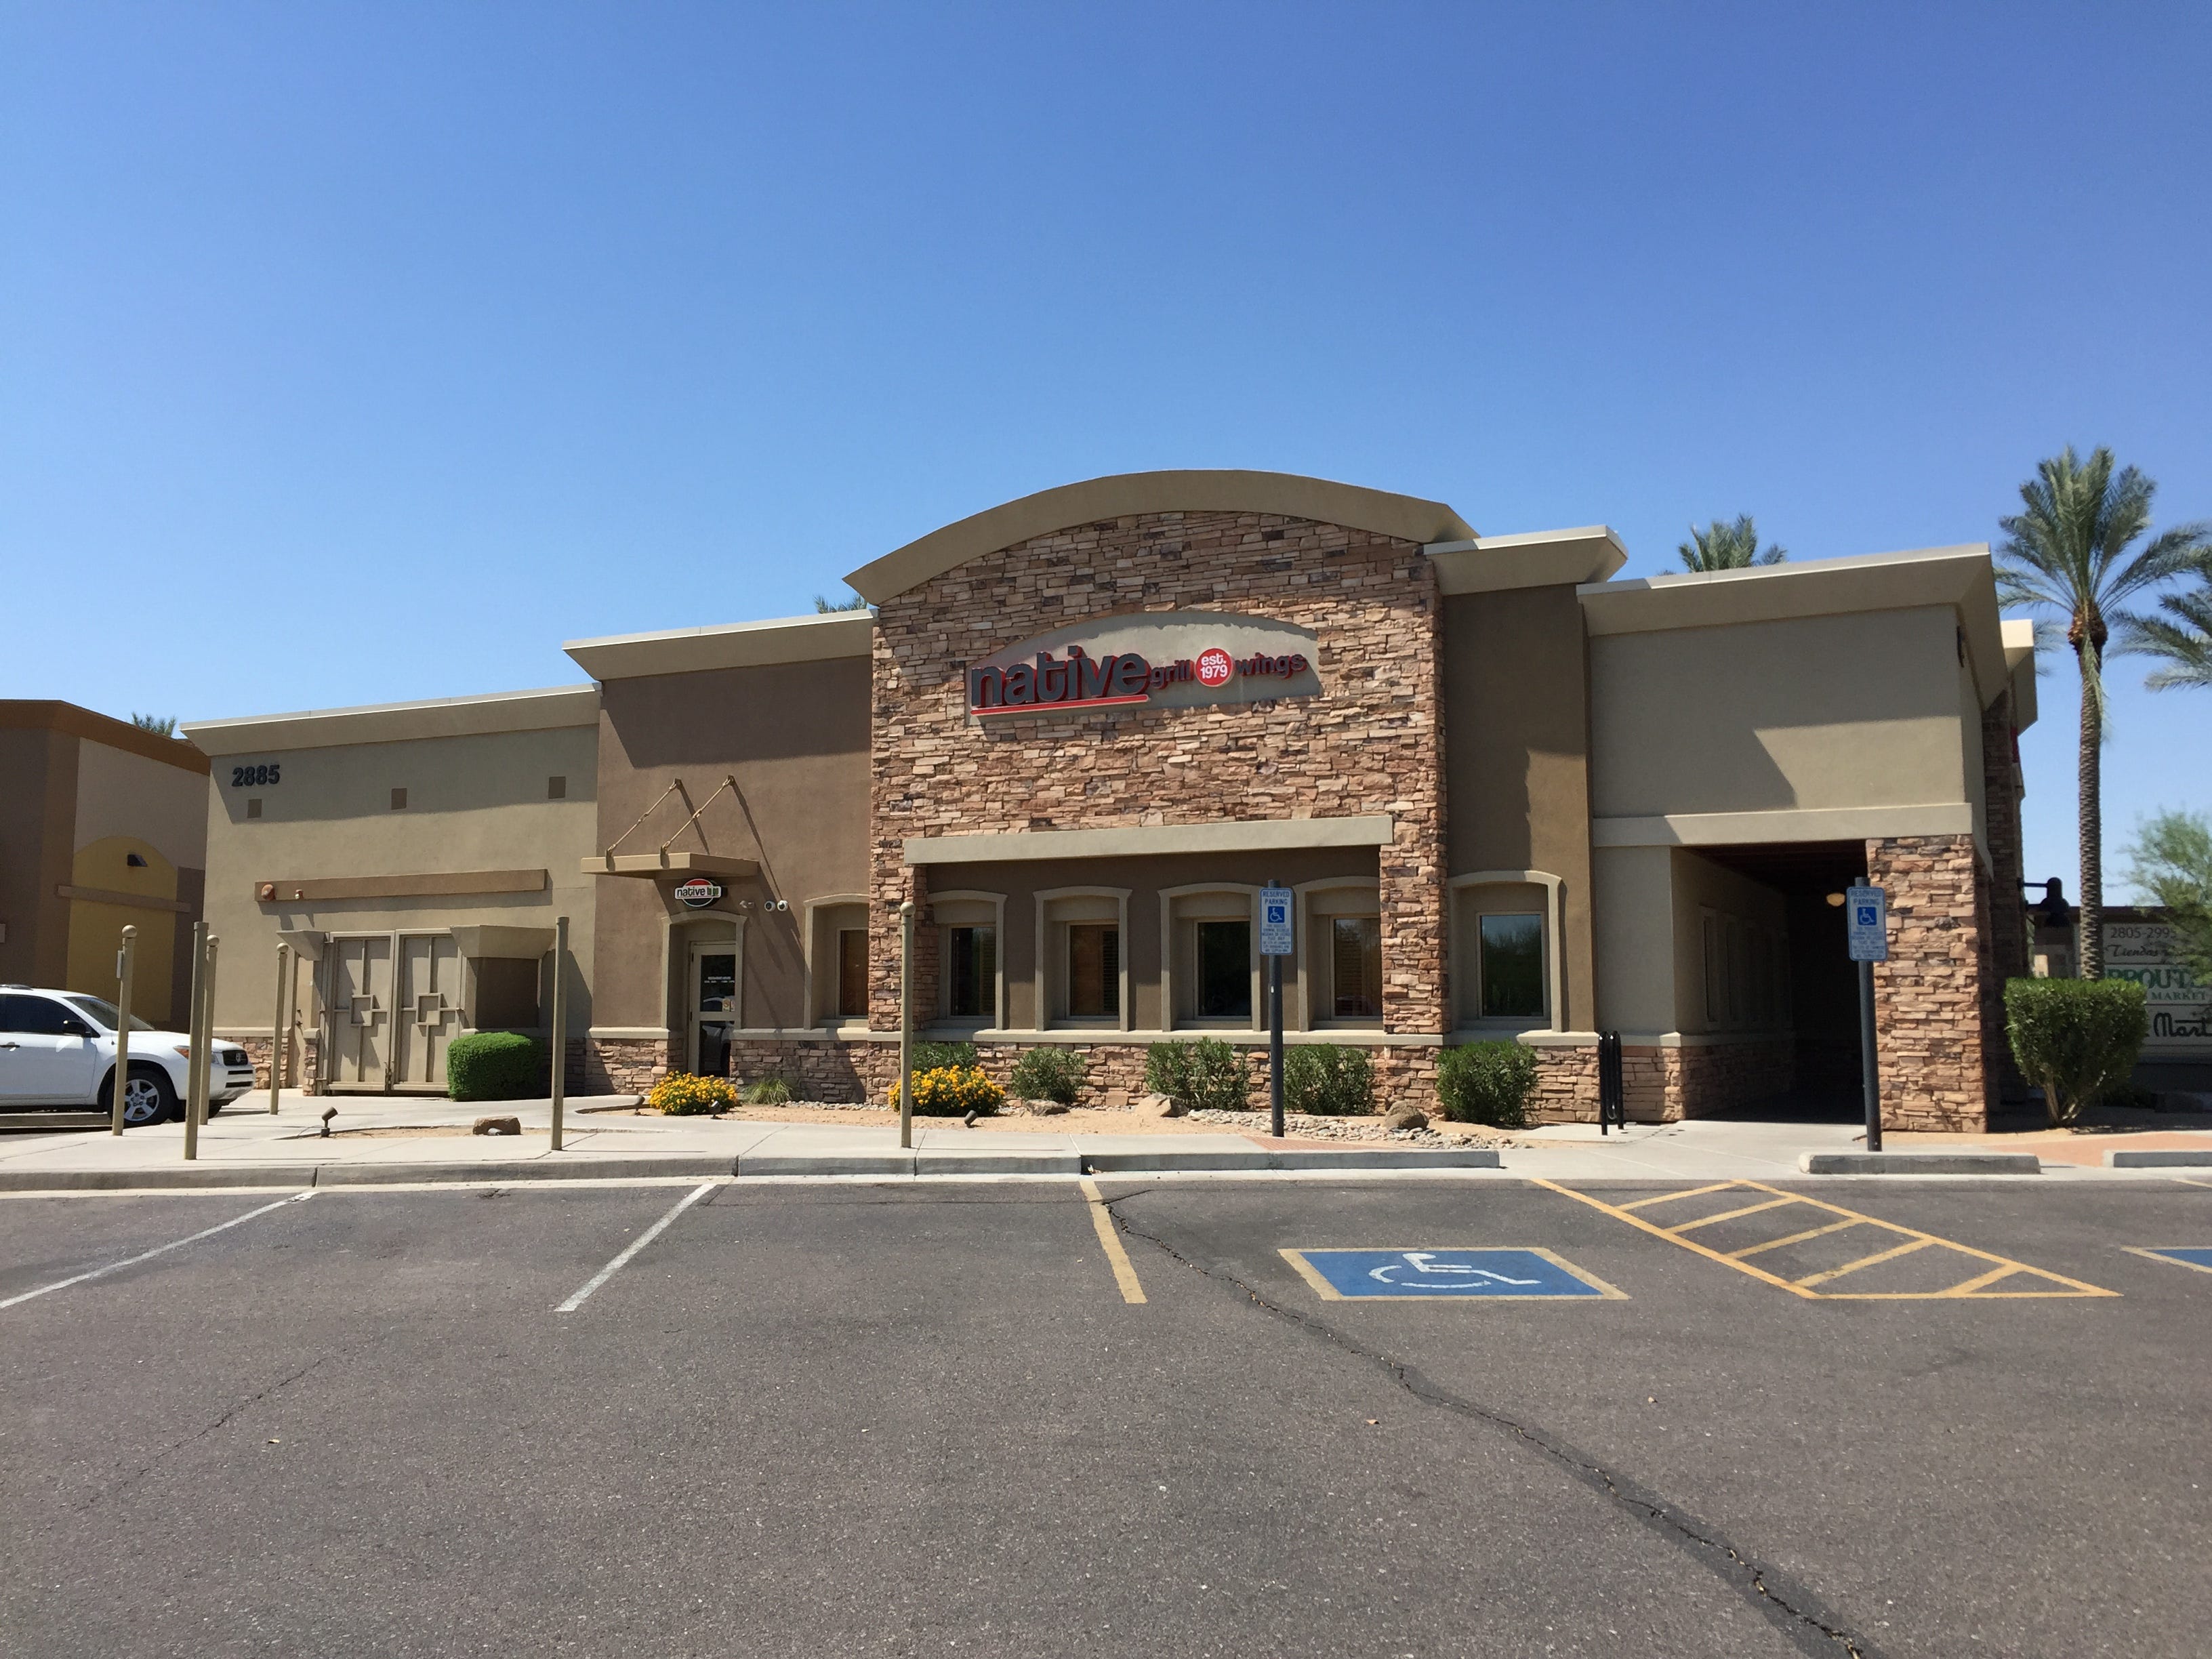 Native Grill & Wings in Chandler to close July 1; blame game underway